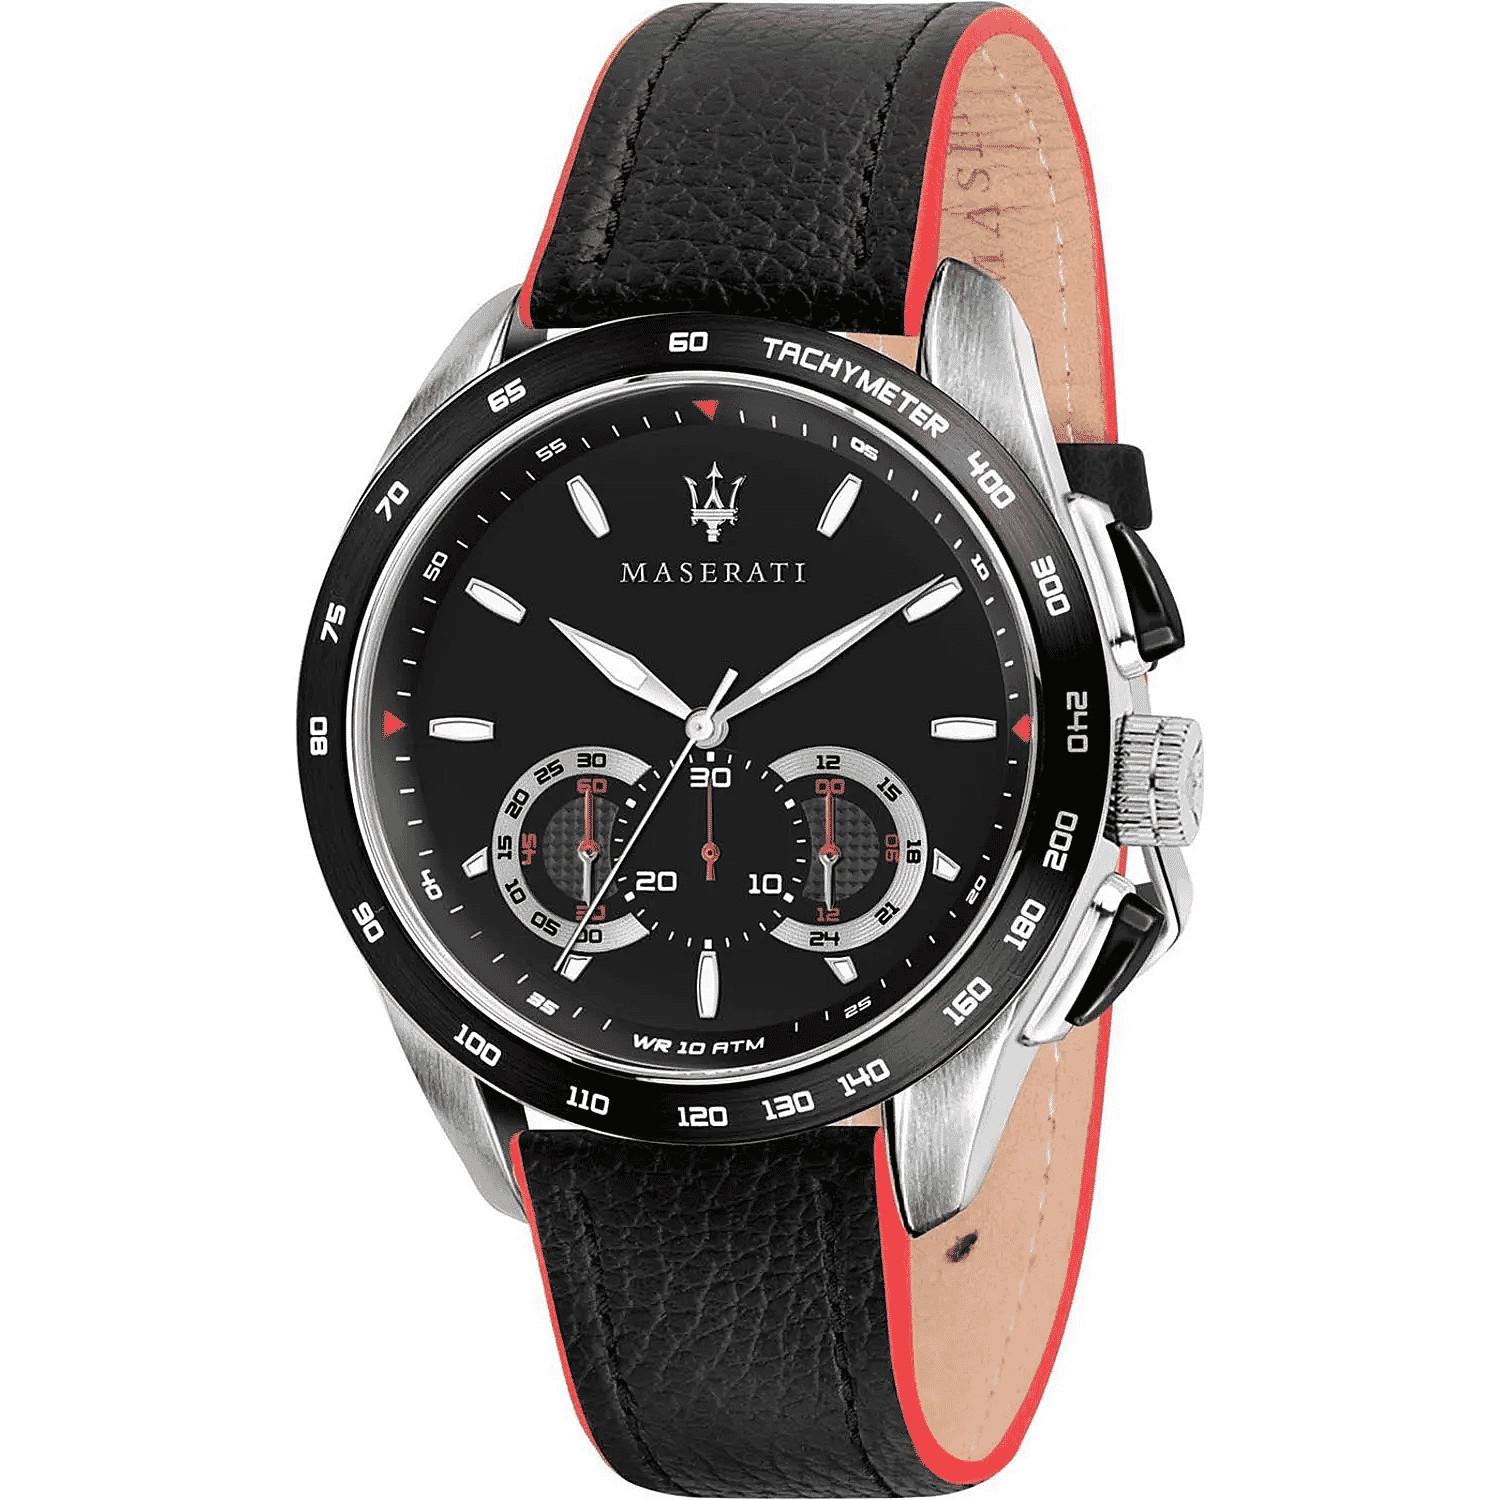 Maserati Quartz Movement Mens Watch in Leather with Complimentary Gammon Fragrance